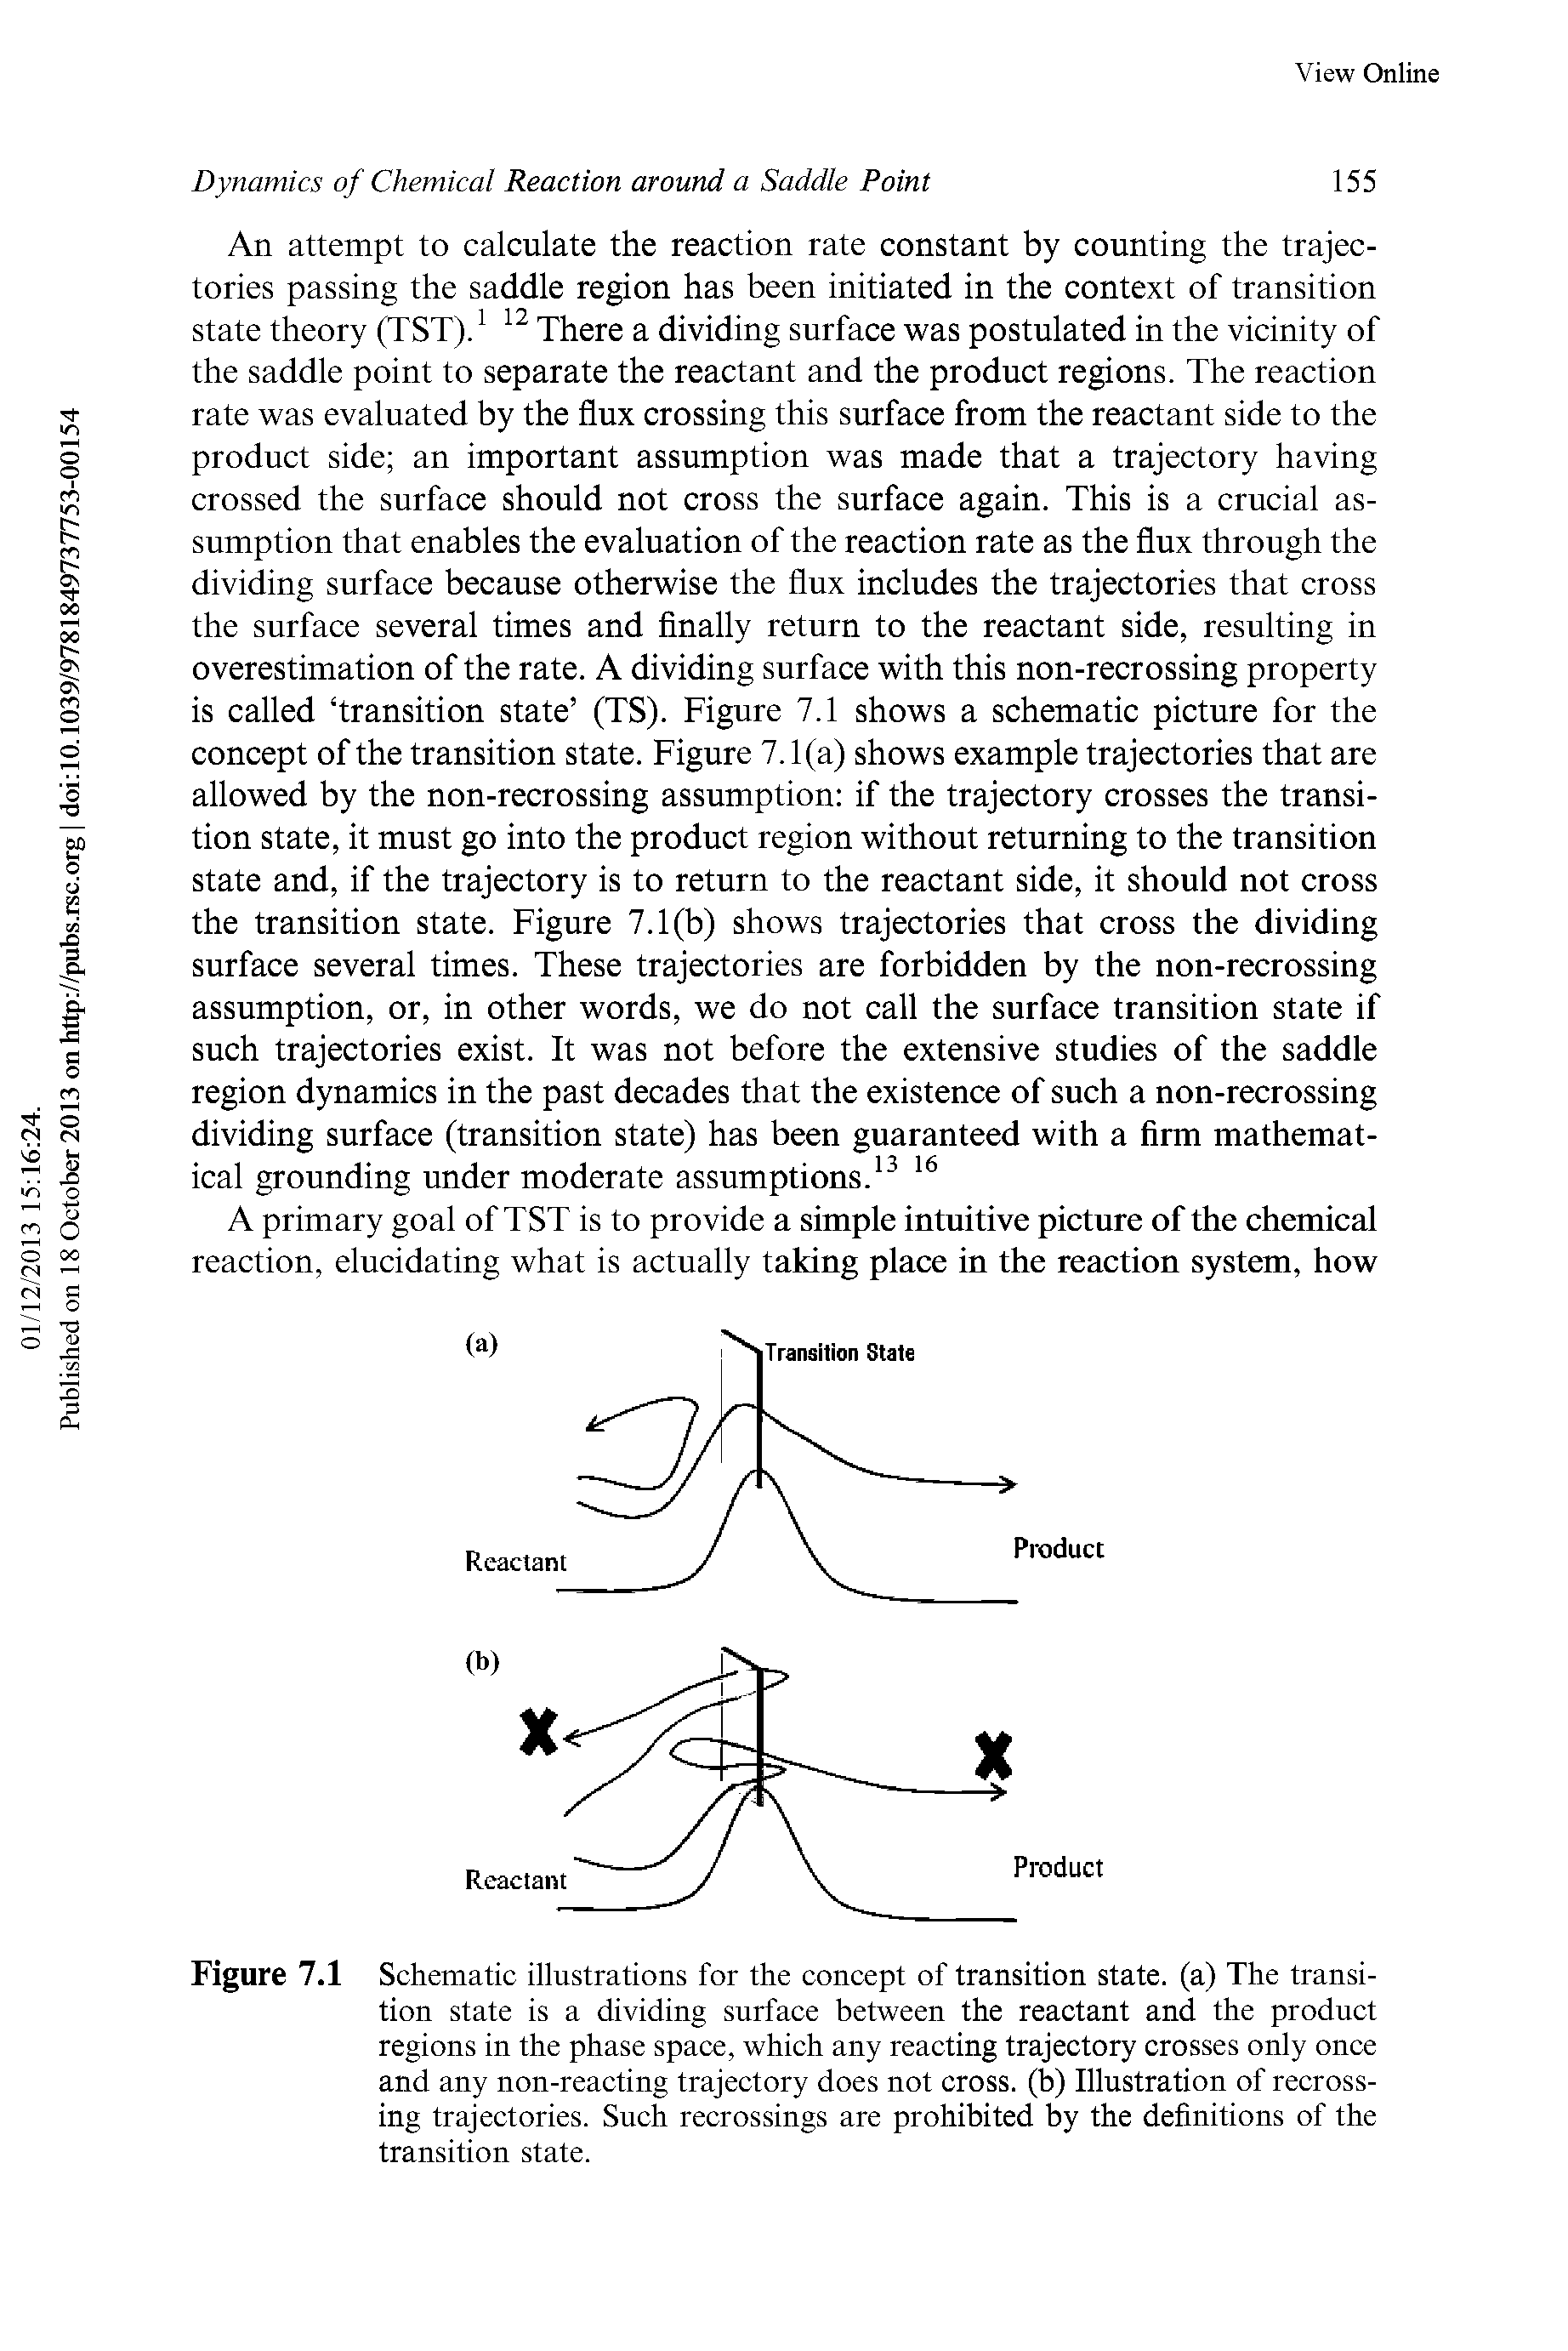 Figure 7.1 Schematic illustrations for the concept of transition state, (a) The transition state is a dividing surface between the reactant and the product regions in the phase space, which any reacting trajectory crosses only once and any non-reacting trajectory does not cross, (b) Illustration of recrossing trajectories. Such recrossings are prohibited by the definitions of the transition state.